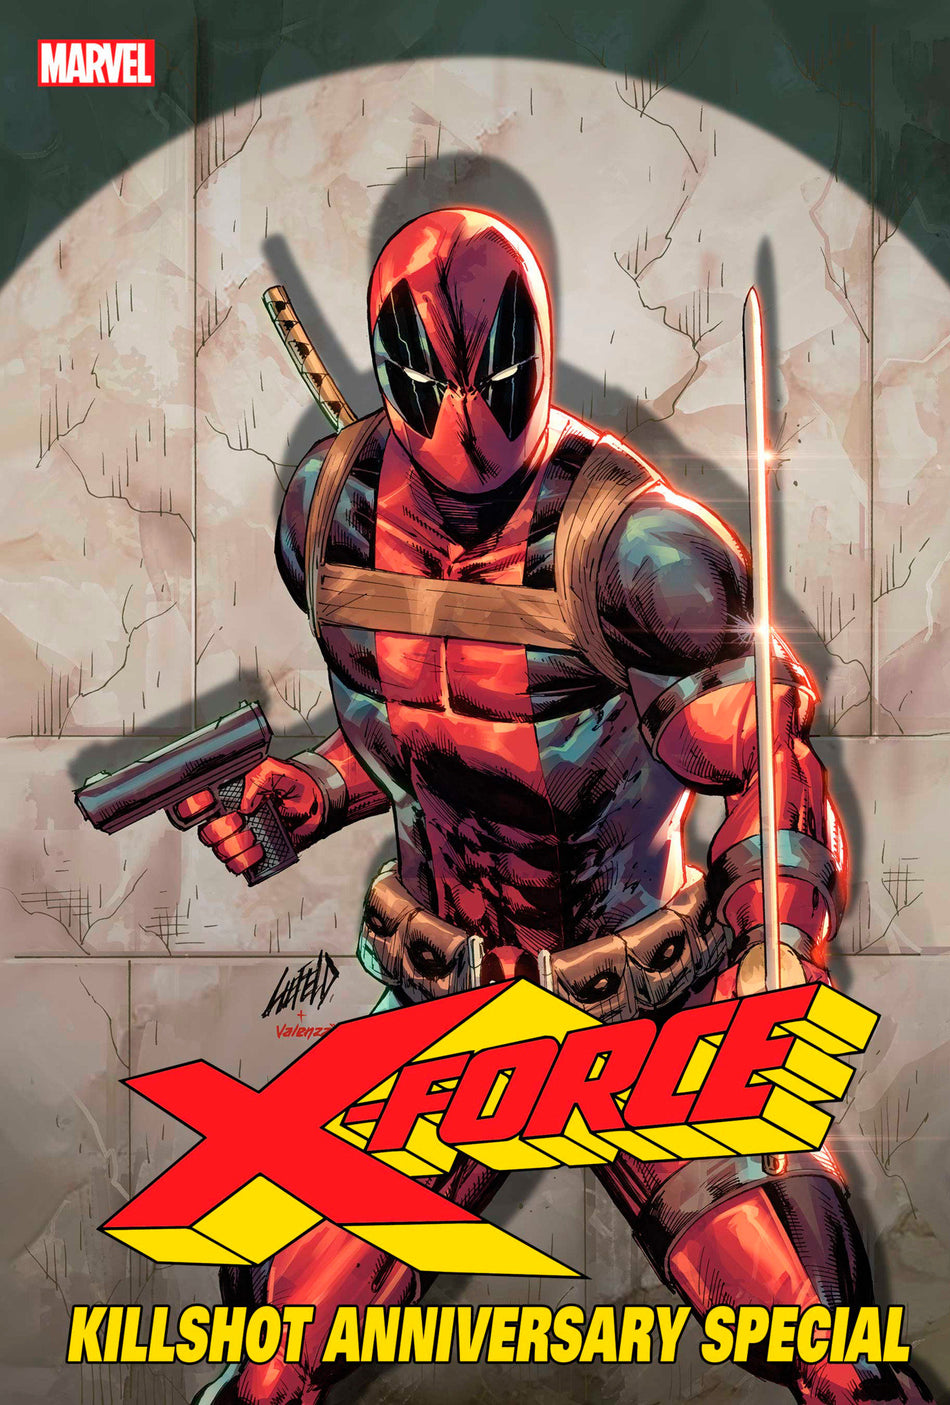 Image of X-Force: Killshot Anniversary Special 1 Liefeld Connecting Variant B comic sold by Stronghold Collectibles.